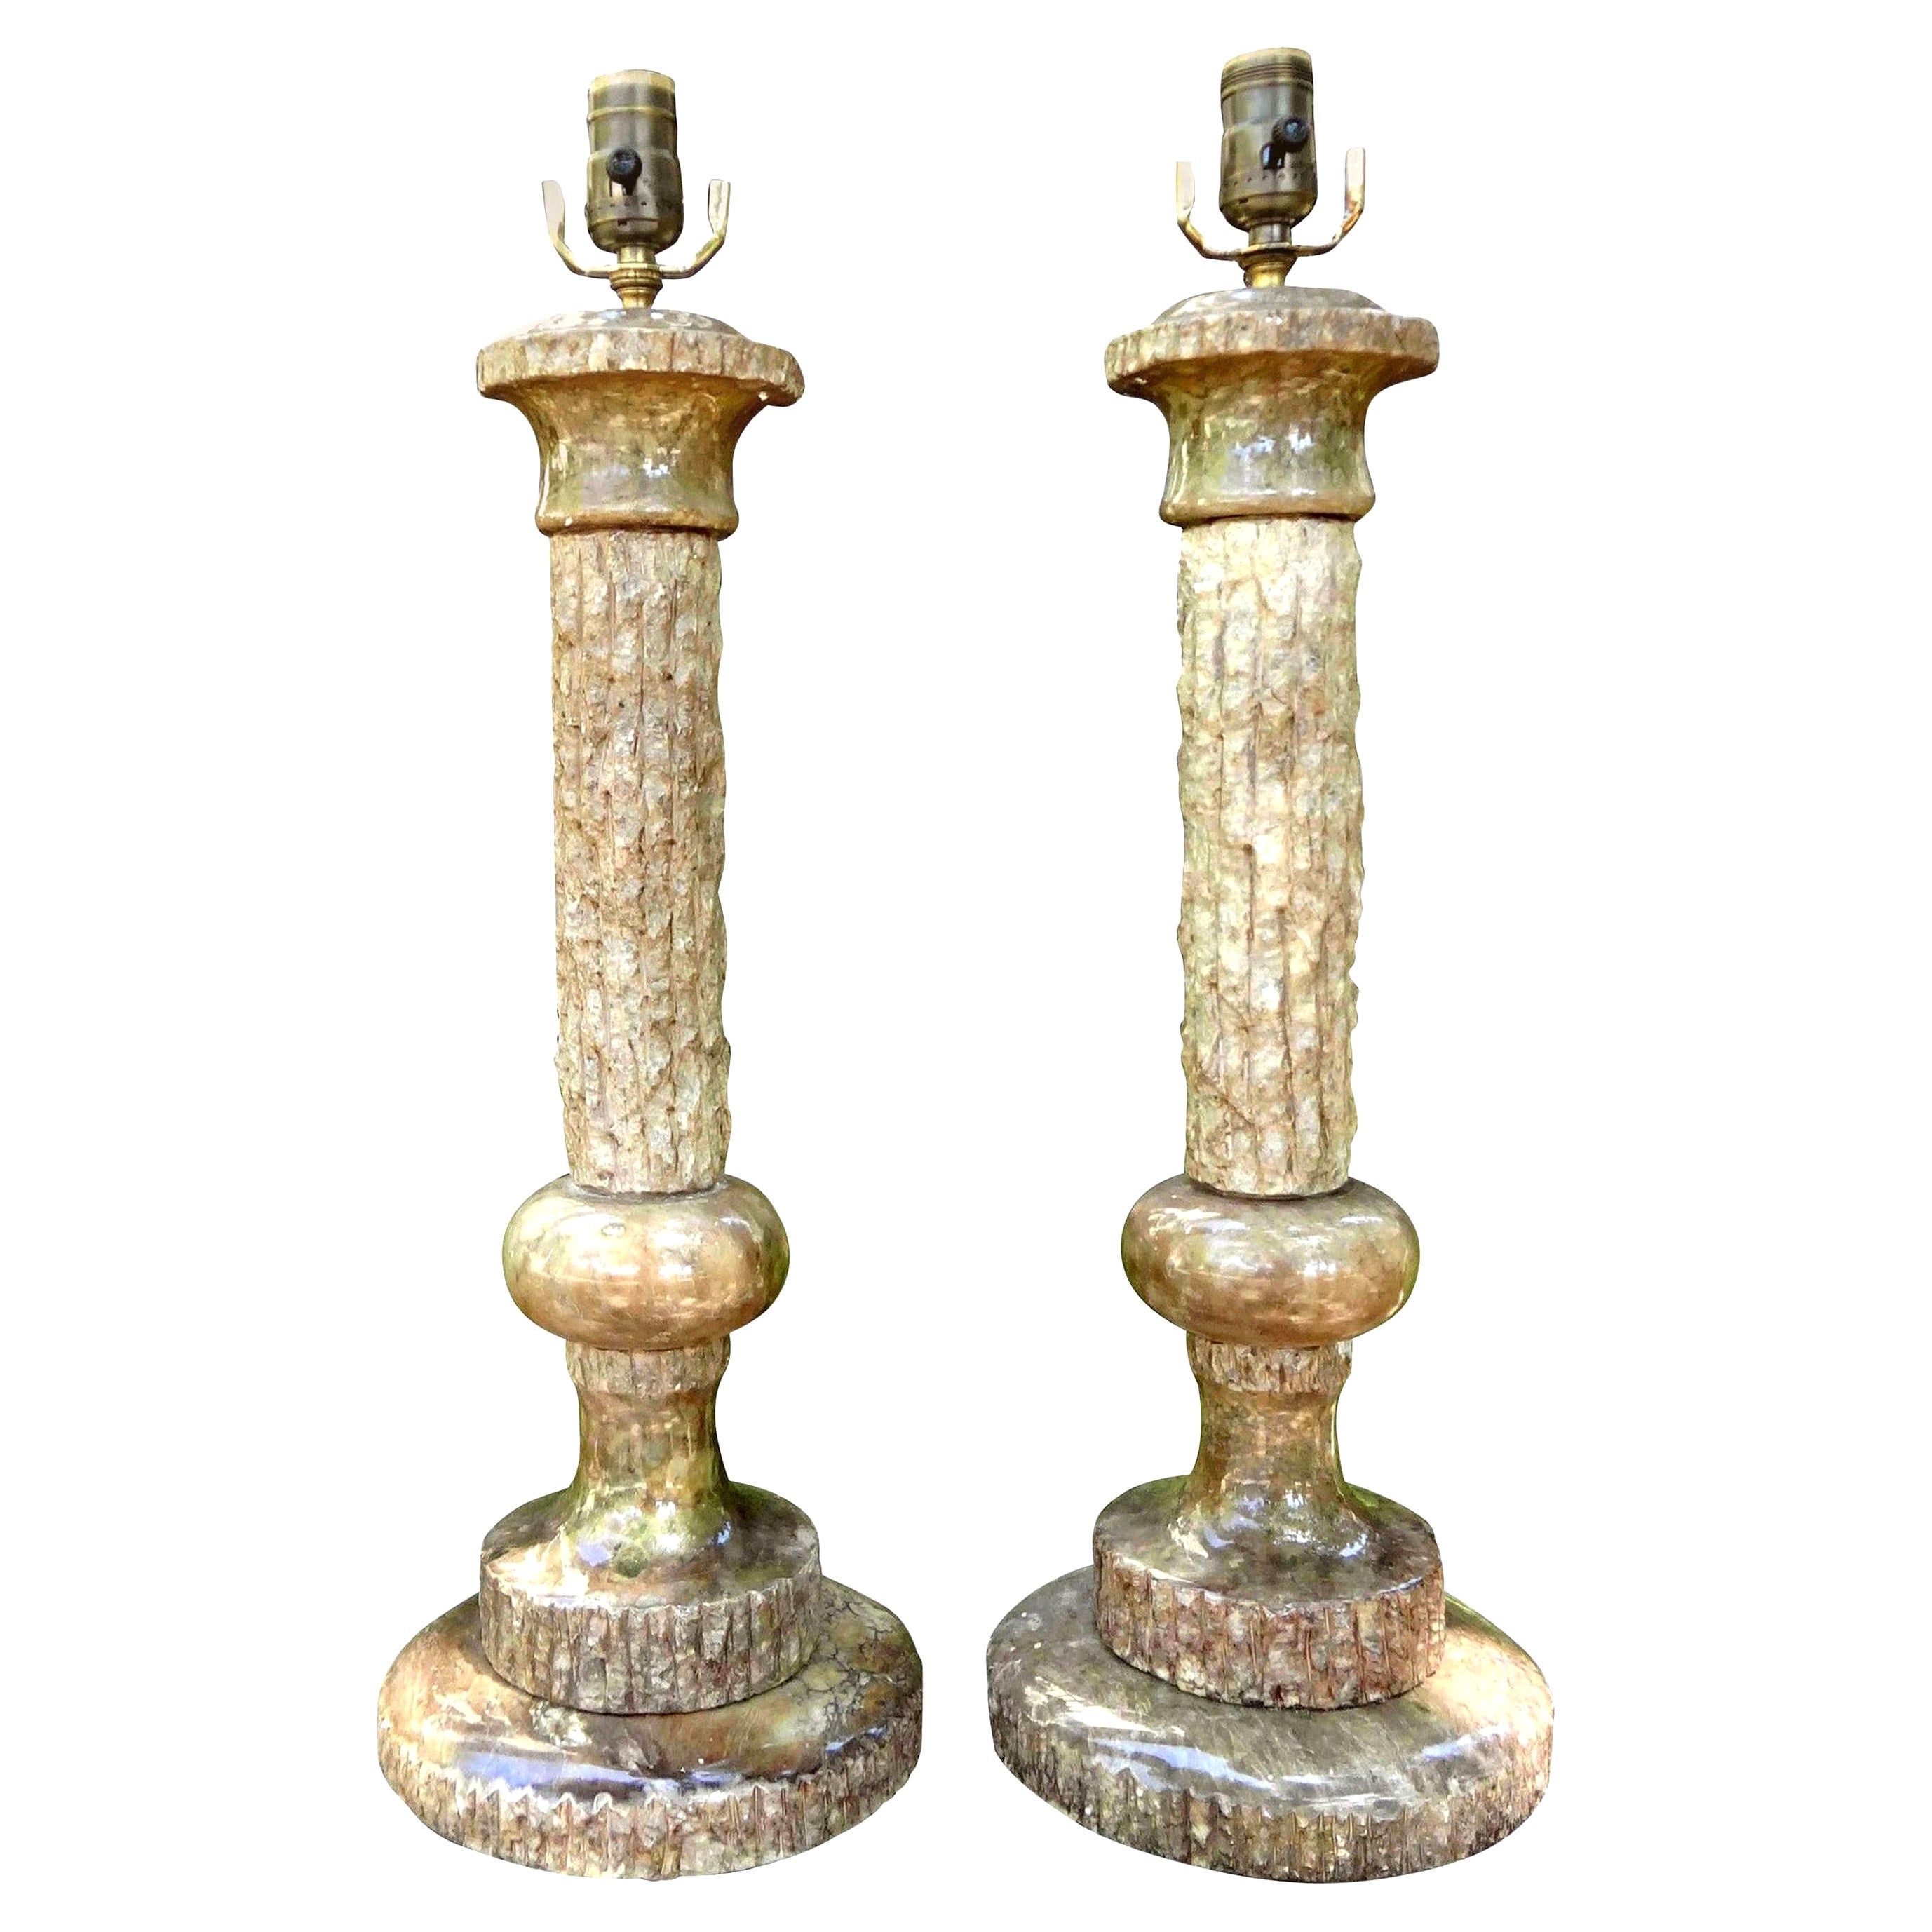 Pair of Midcentury Italian Faux Bois Marble Lamps For Sale